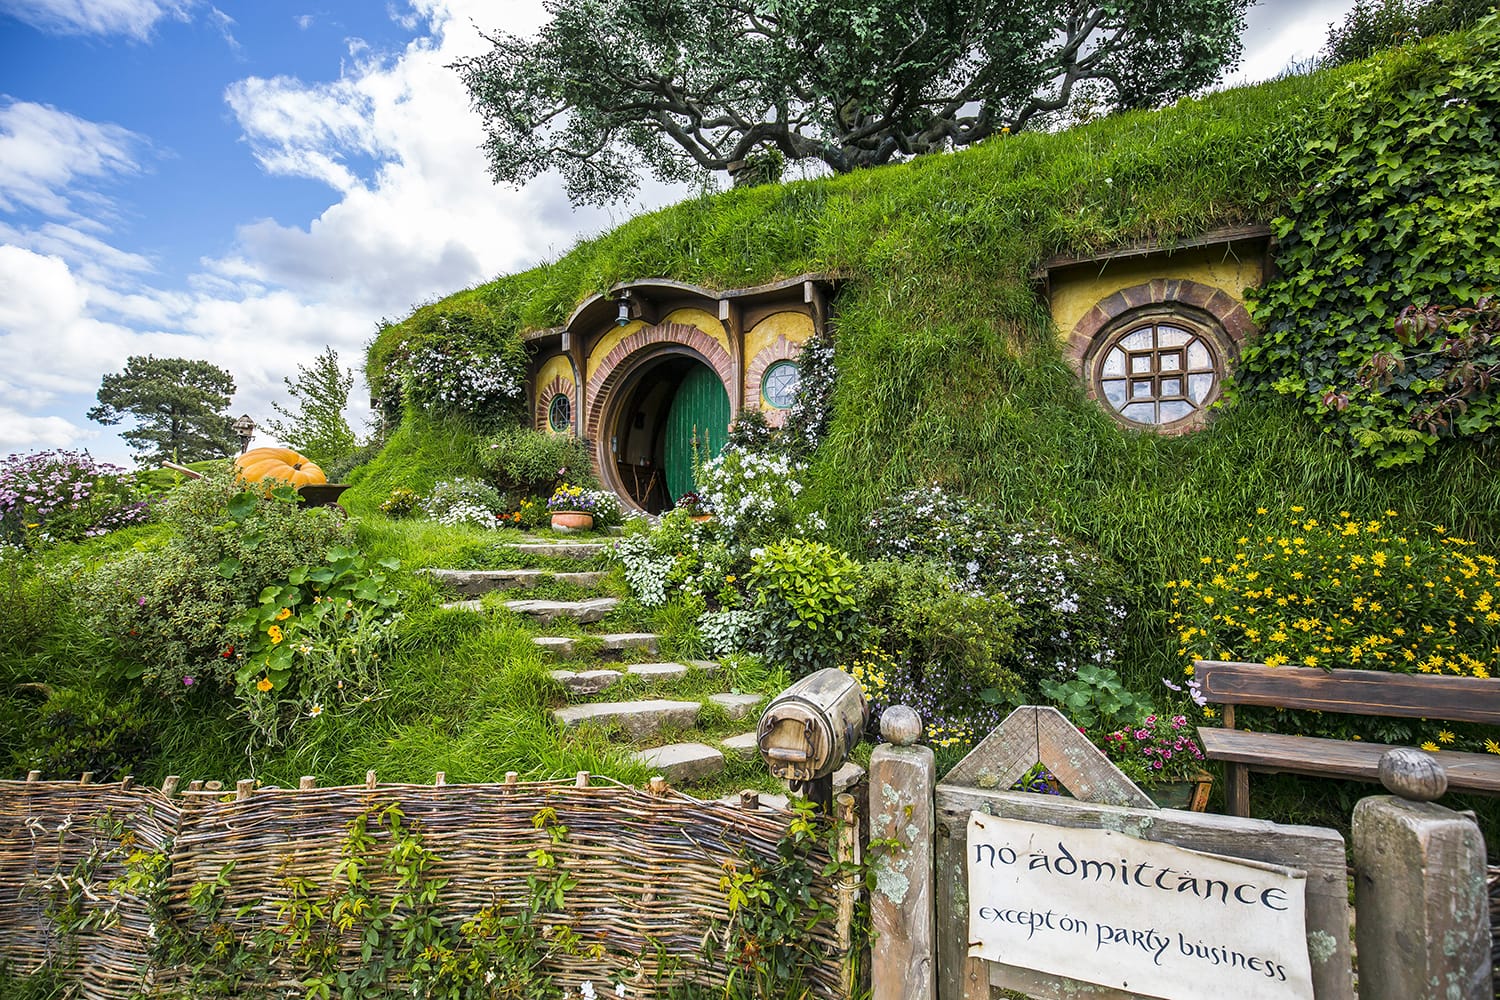 Lord of the Rings Hobbiton movie set in New Zealand